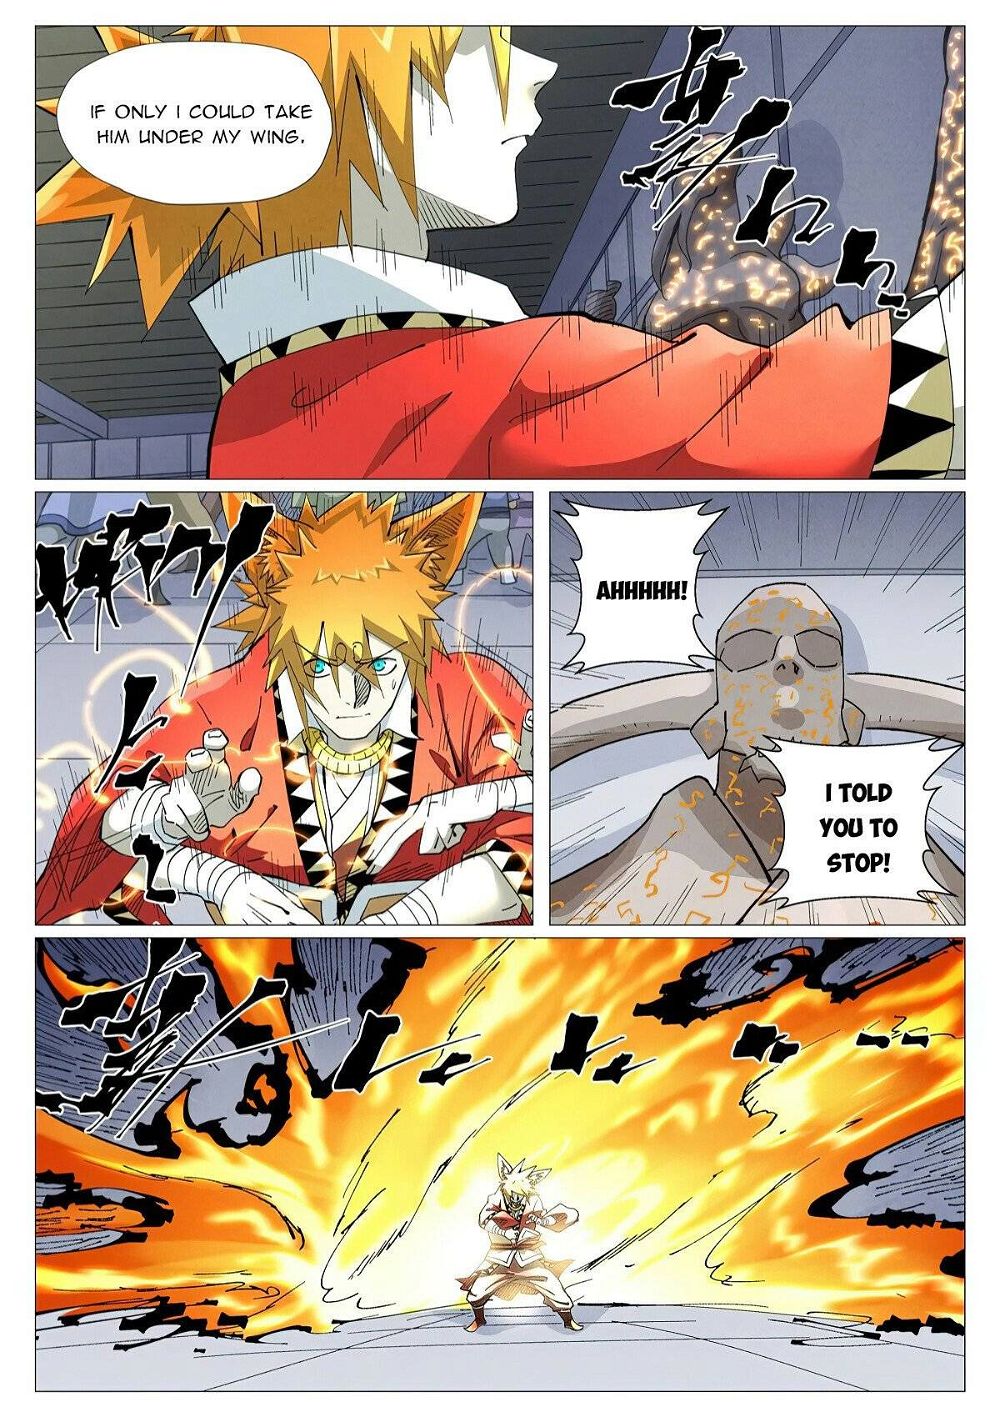 Tales of Demons and Gods Chapter 402.6 - Page 6